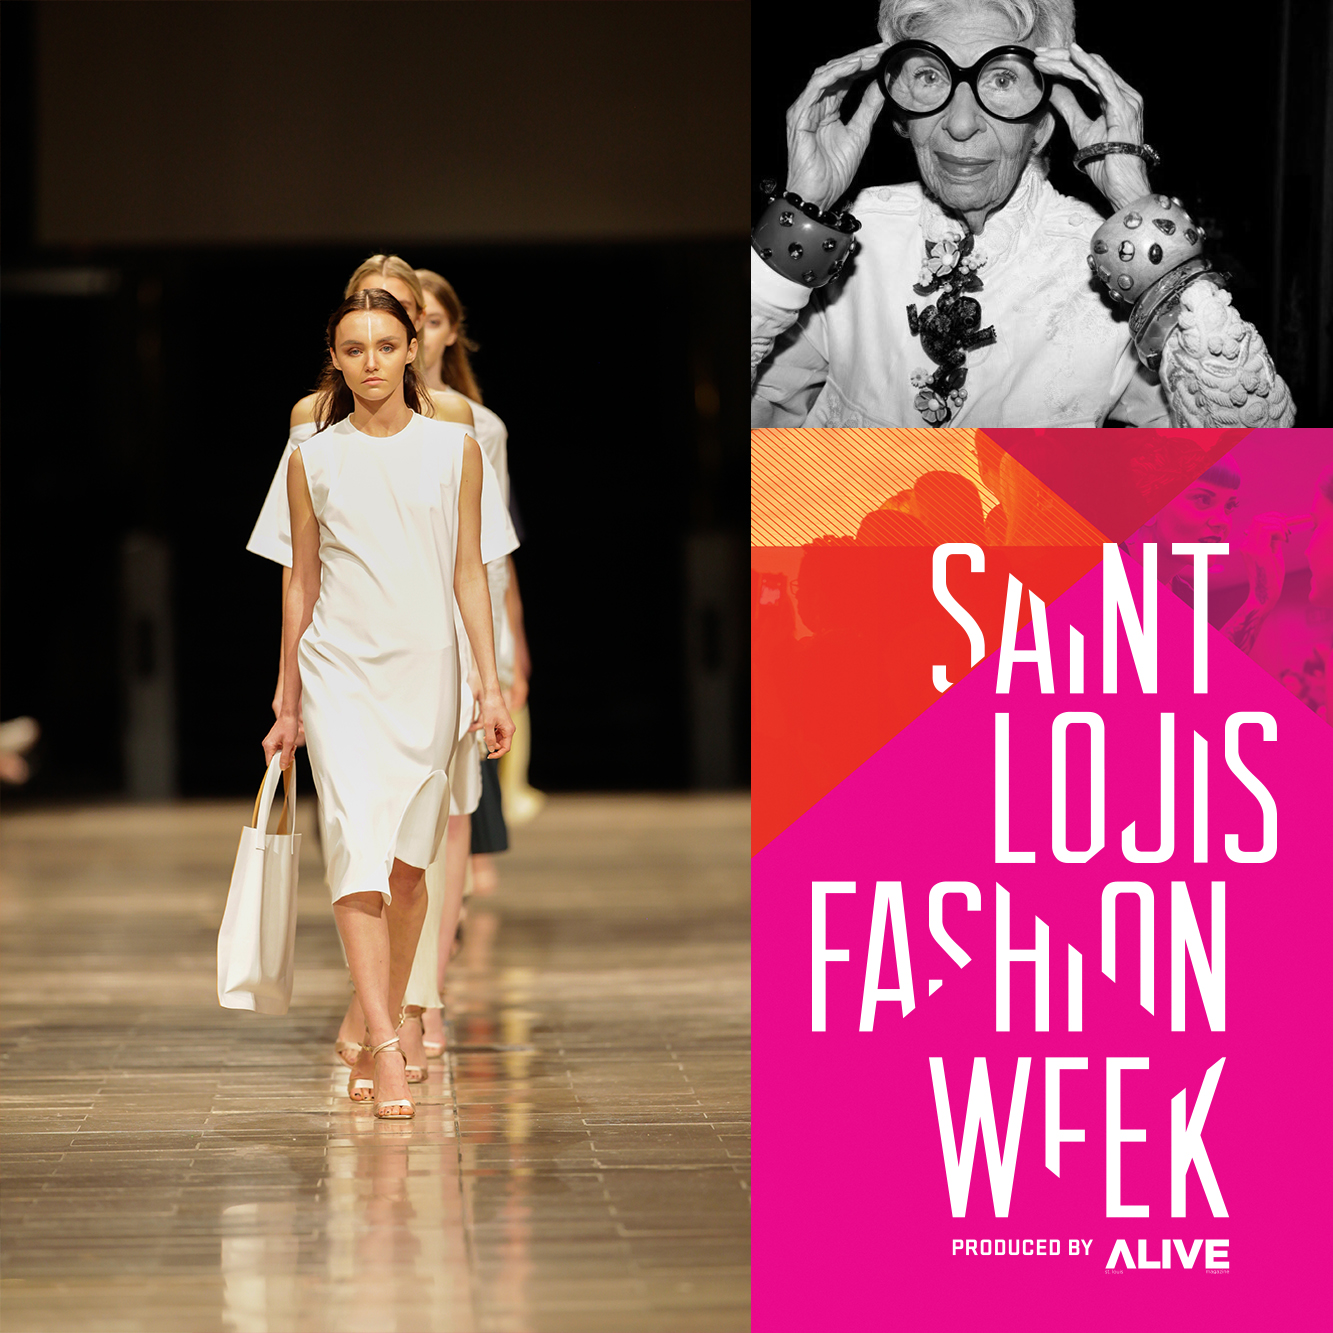 Collage of Saint Louis Fashion Week photos and branding, including model and Iris Apfel